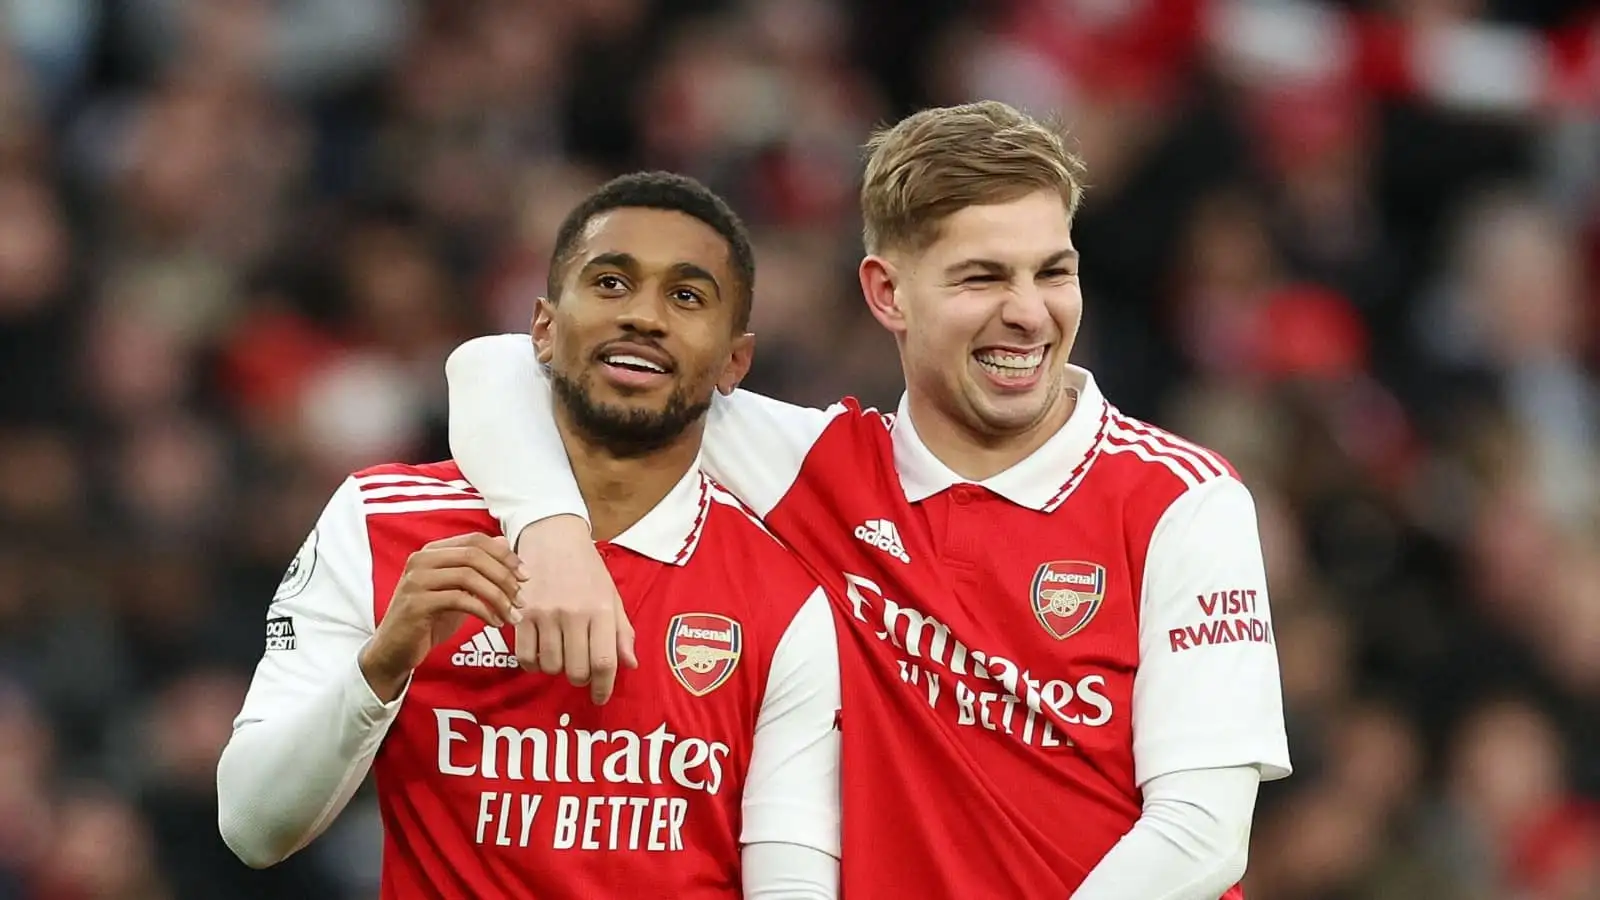 Reiss Nelson and Emile Smith Rowe of Arsenal